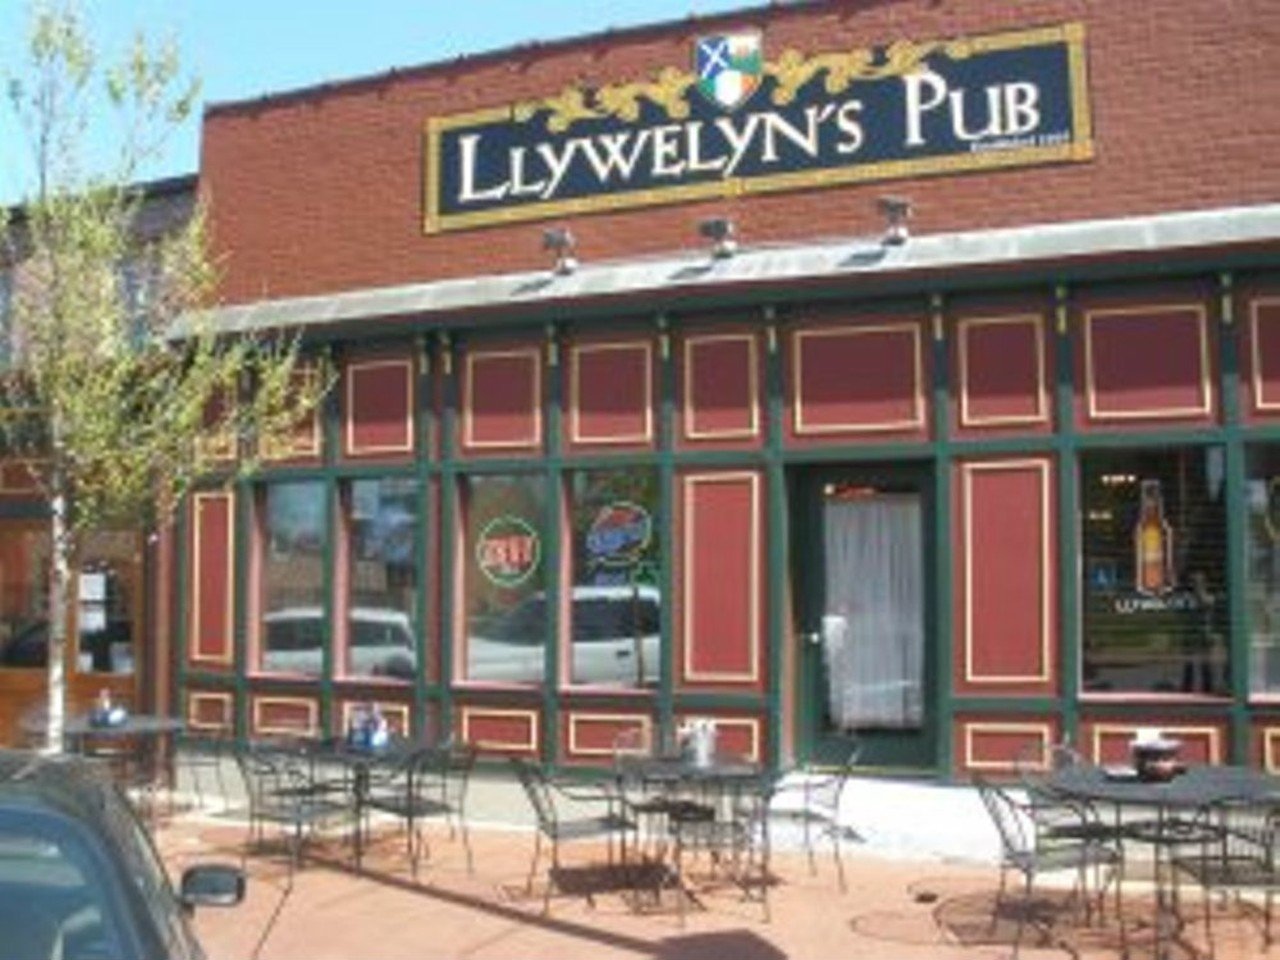 Llywelyn's Pub
Locations in Central West End, Soulard, Webster Groves, St. Charles and more
"Celtic for good times," Llwelyn's fills your Irish pub needs in both its food menu and its beer and whiskey. It also has a variety of locations throughout the St. Louis area, many of which offer late-night menus. Check Llywelyn's website for details about each location's offerings. RFT photo.